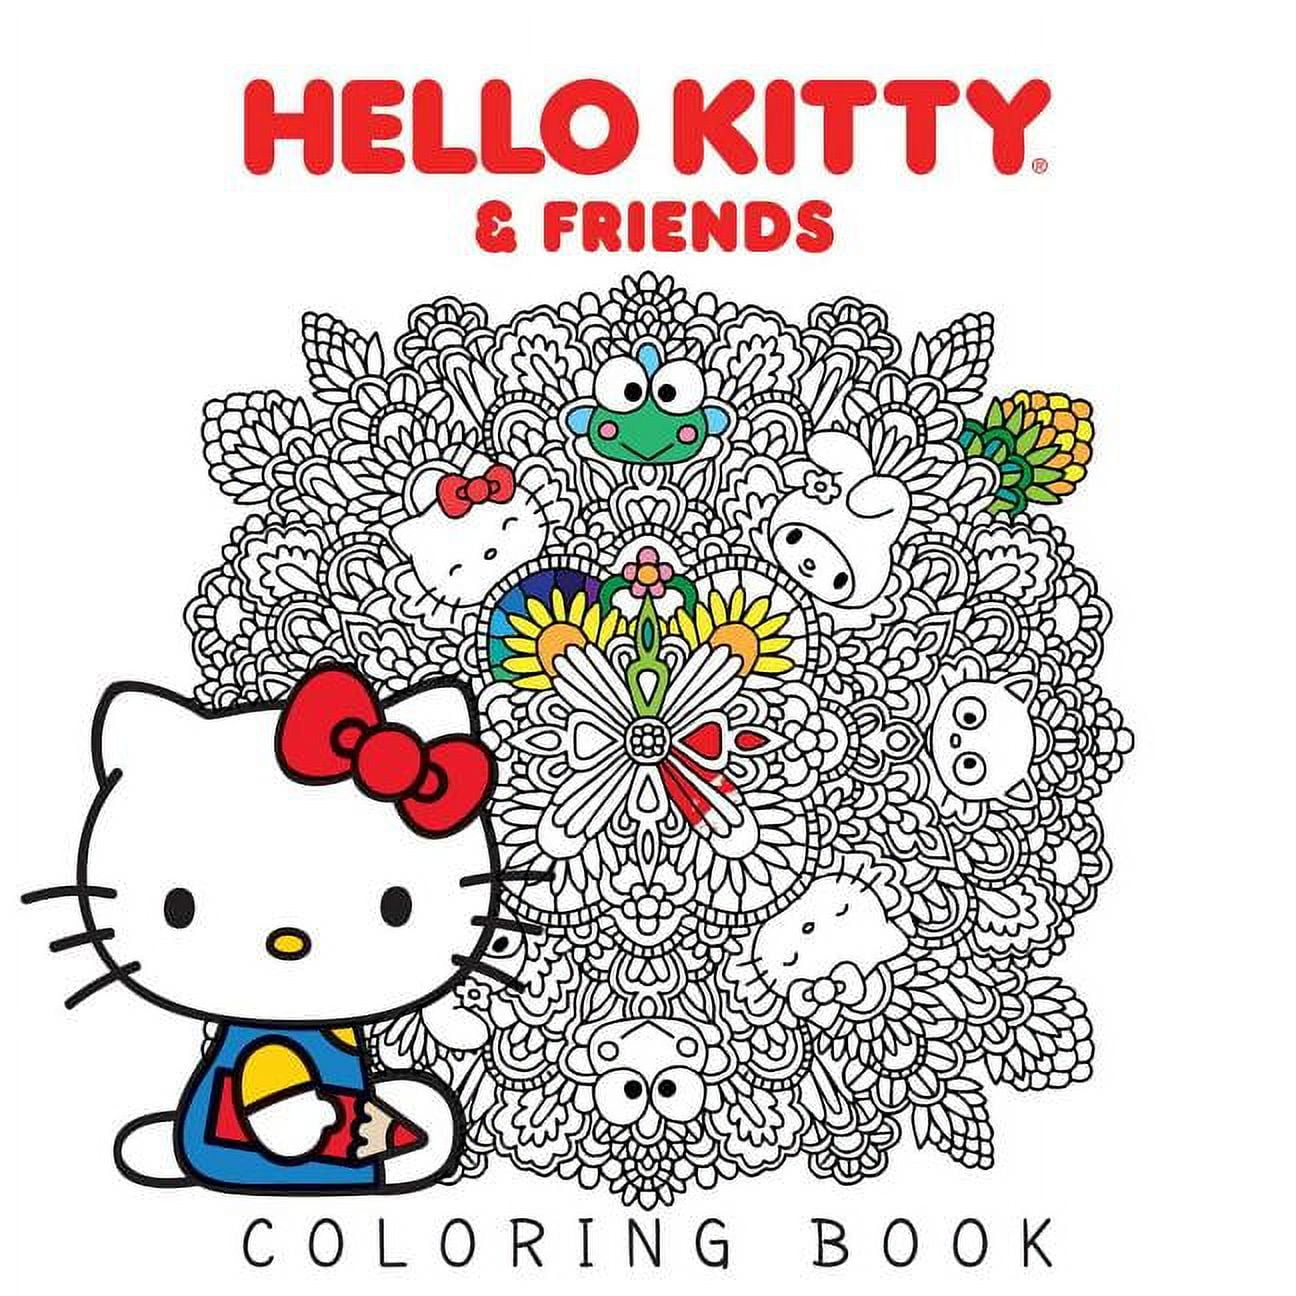 Hello Kitty & Friends Coloring Book, Series No. 1 (Paperback)